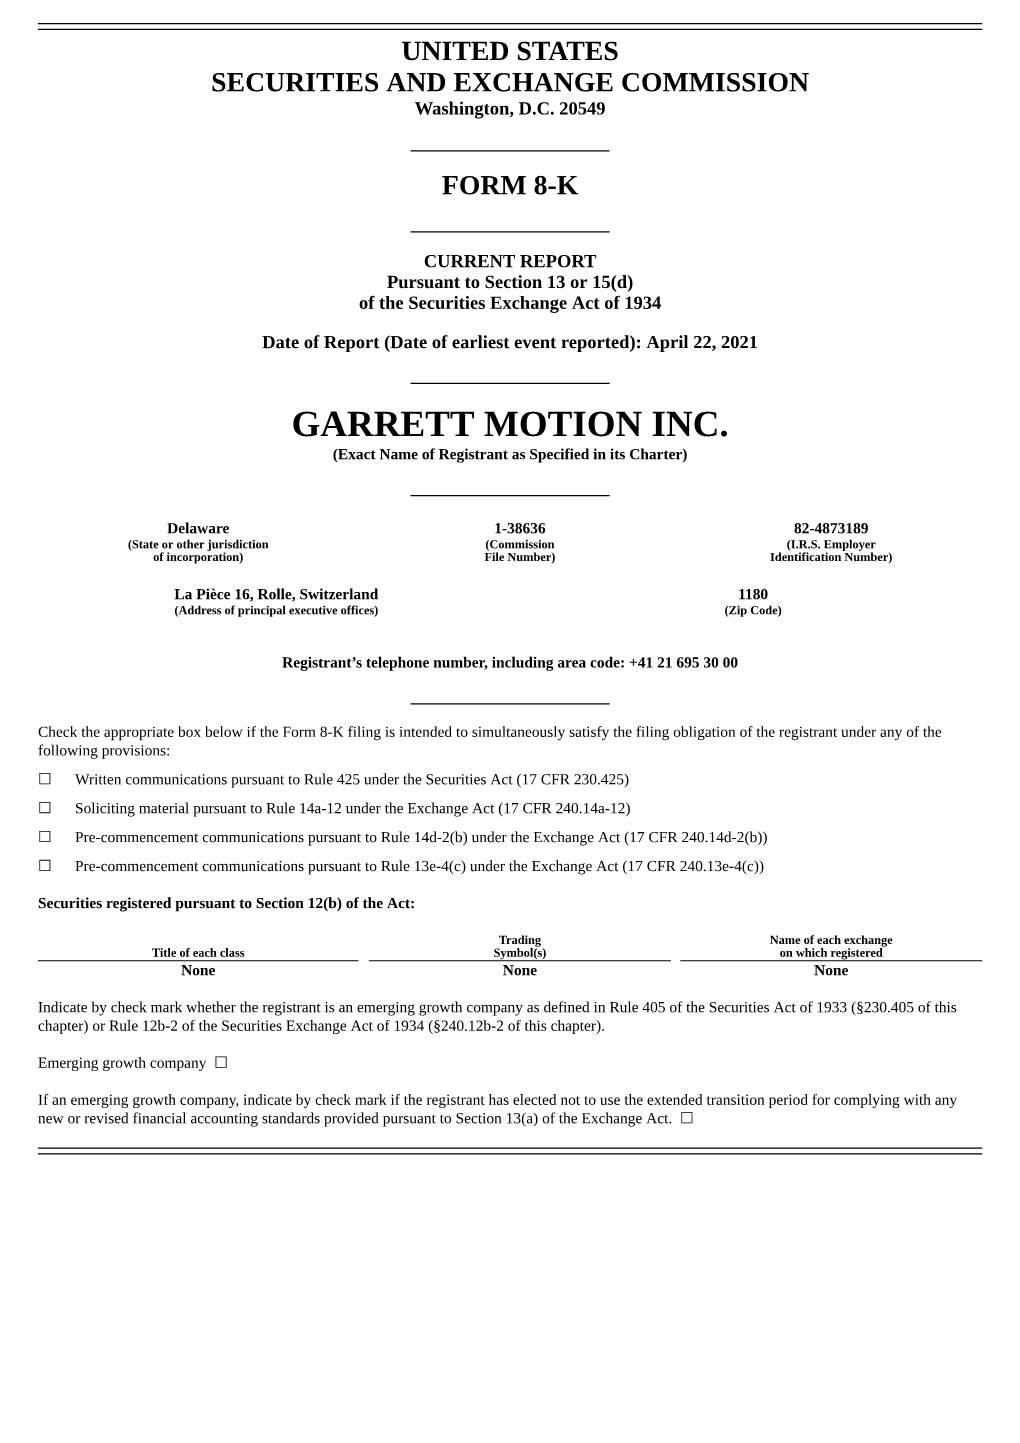 GARRETT MOTION INC. (Exact Name of Registrant As Specified in Its Charter)